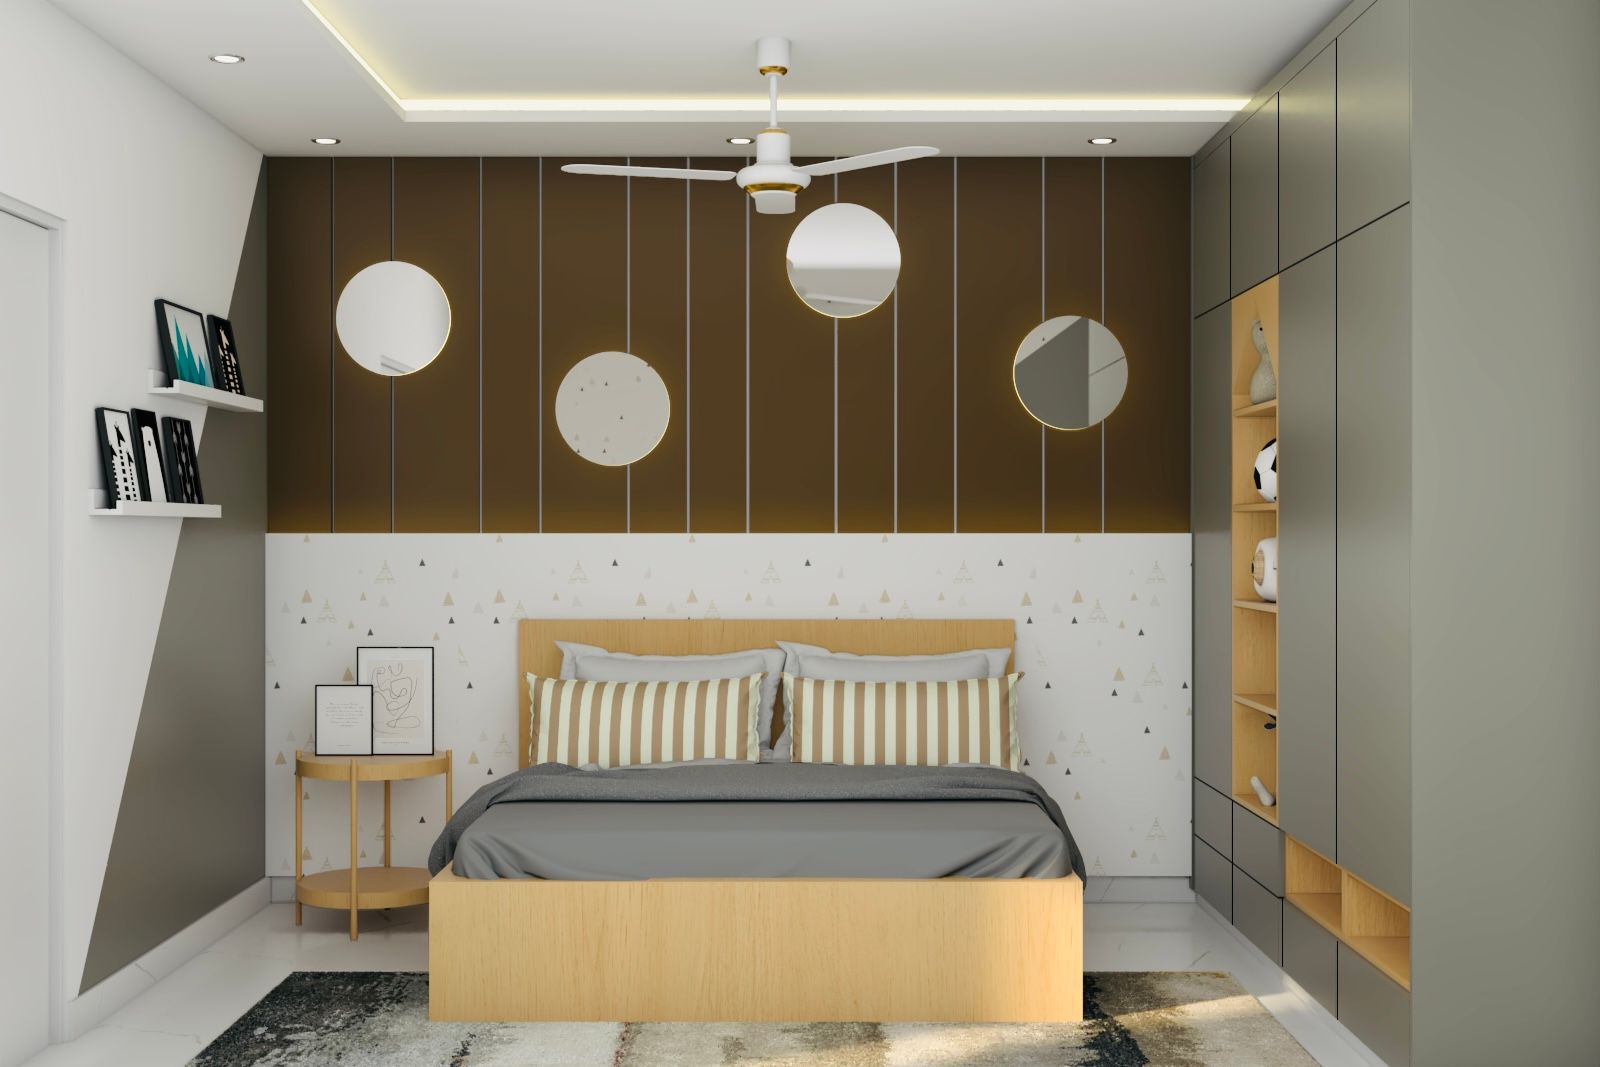 Contemporary Kids Room Design With A Wooden Bed And A Swing Wardrobe With Lofts